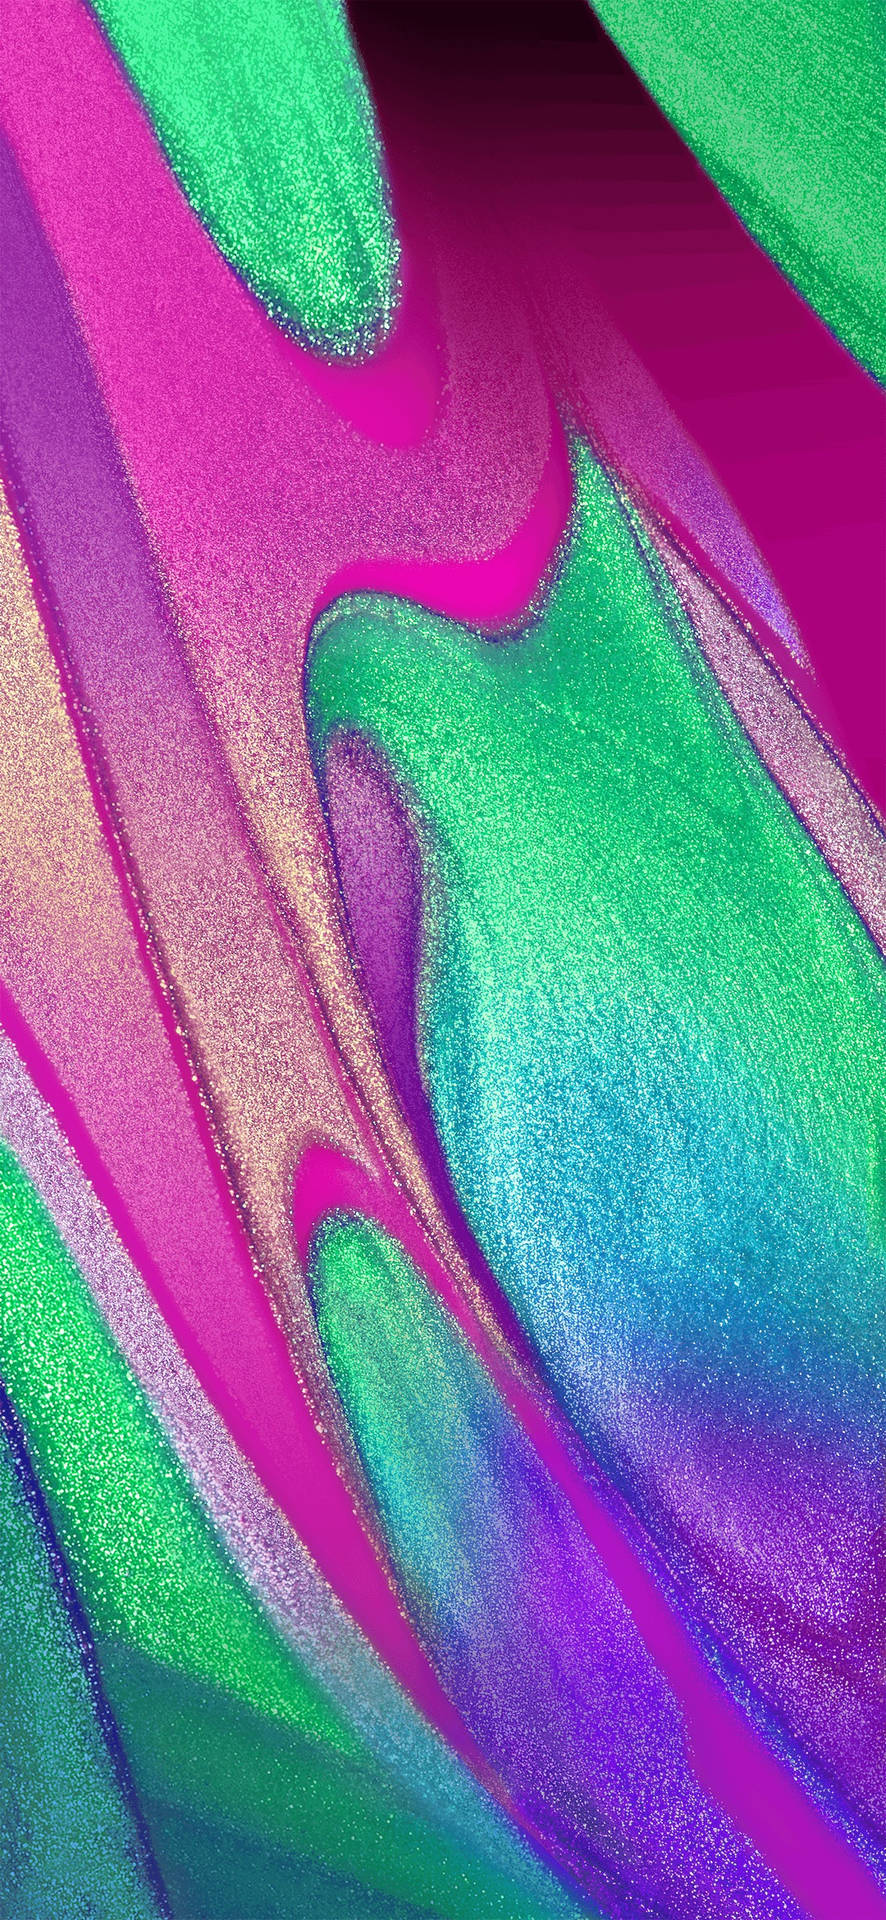 Vibrant Abstract Art On Samsung A51 Display Background